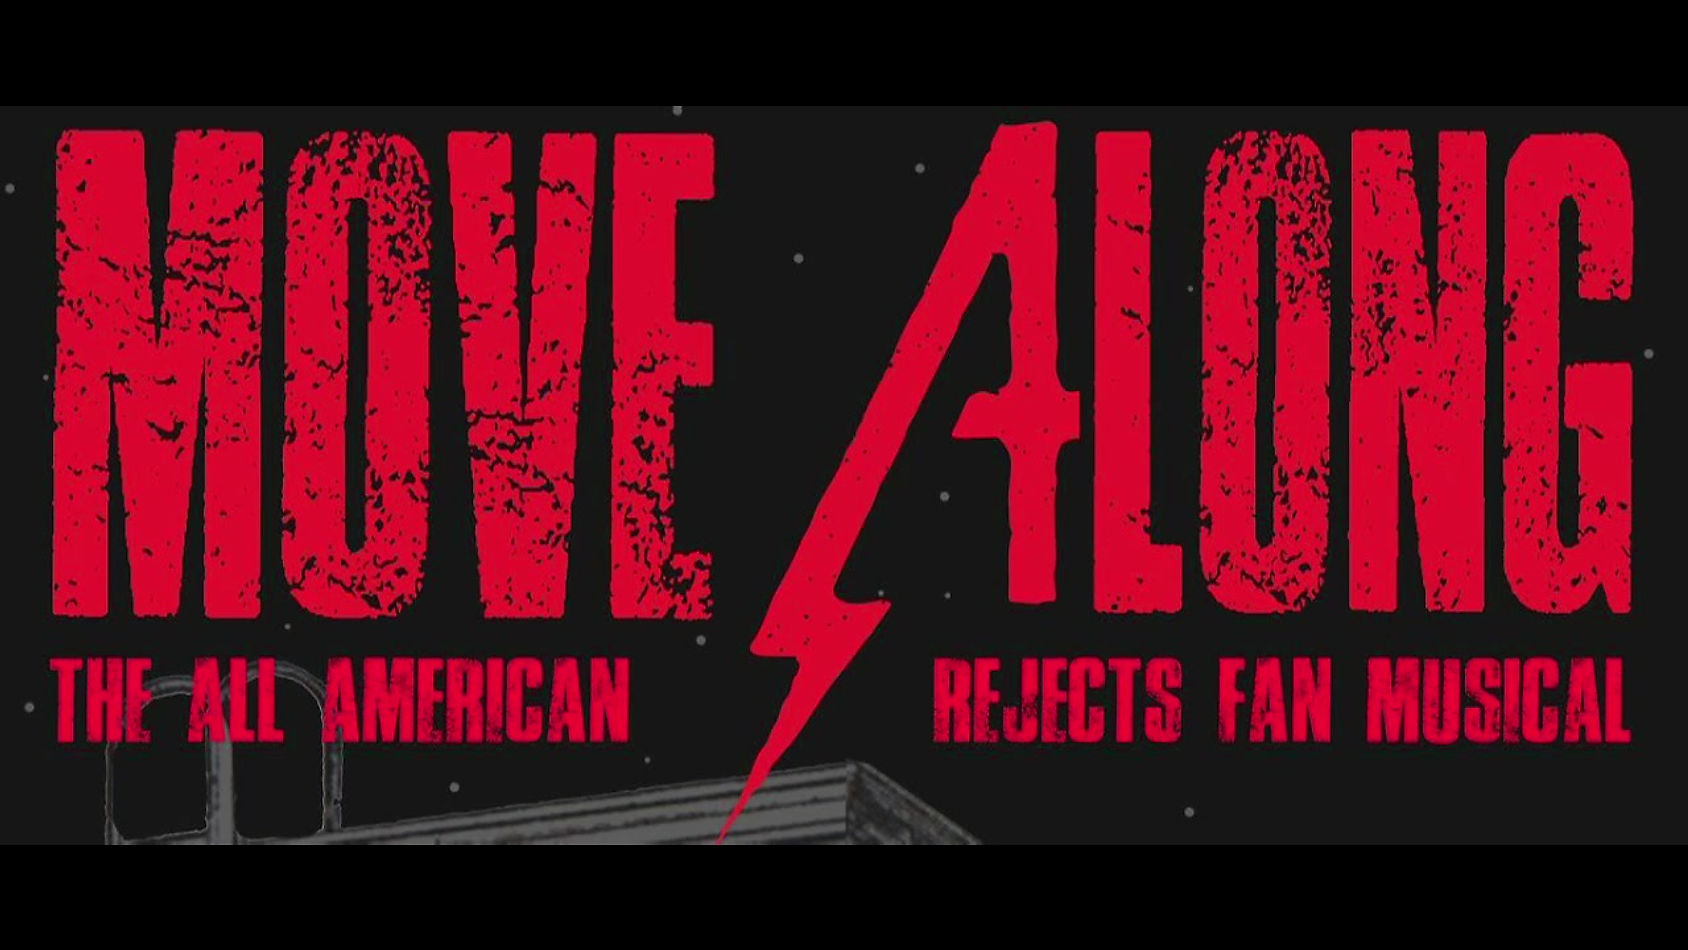 Move Along The All American Rejects Fan Musical